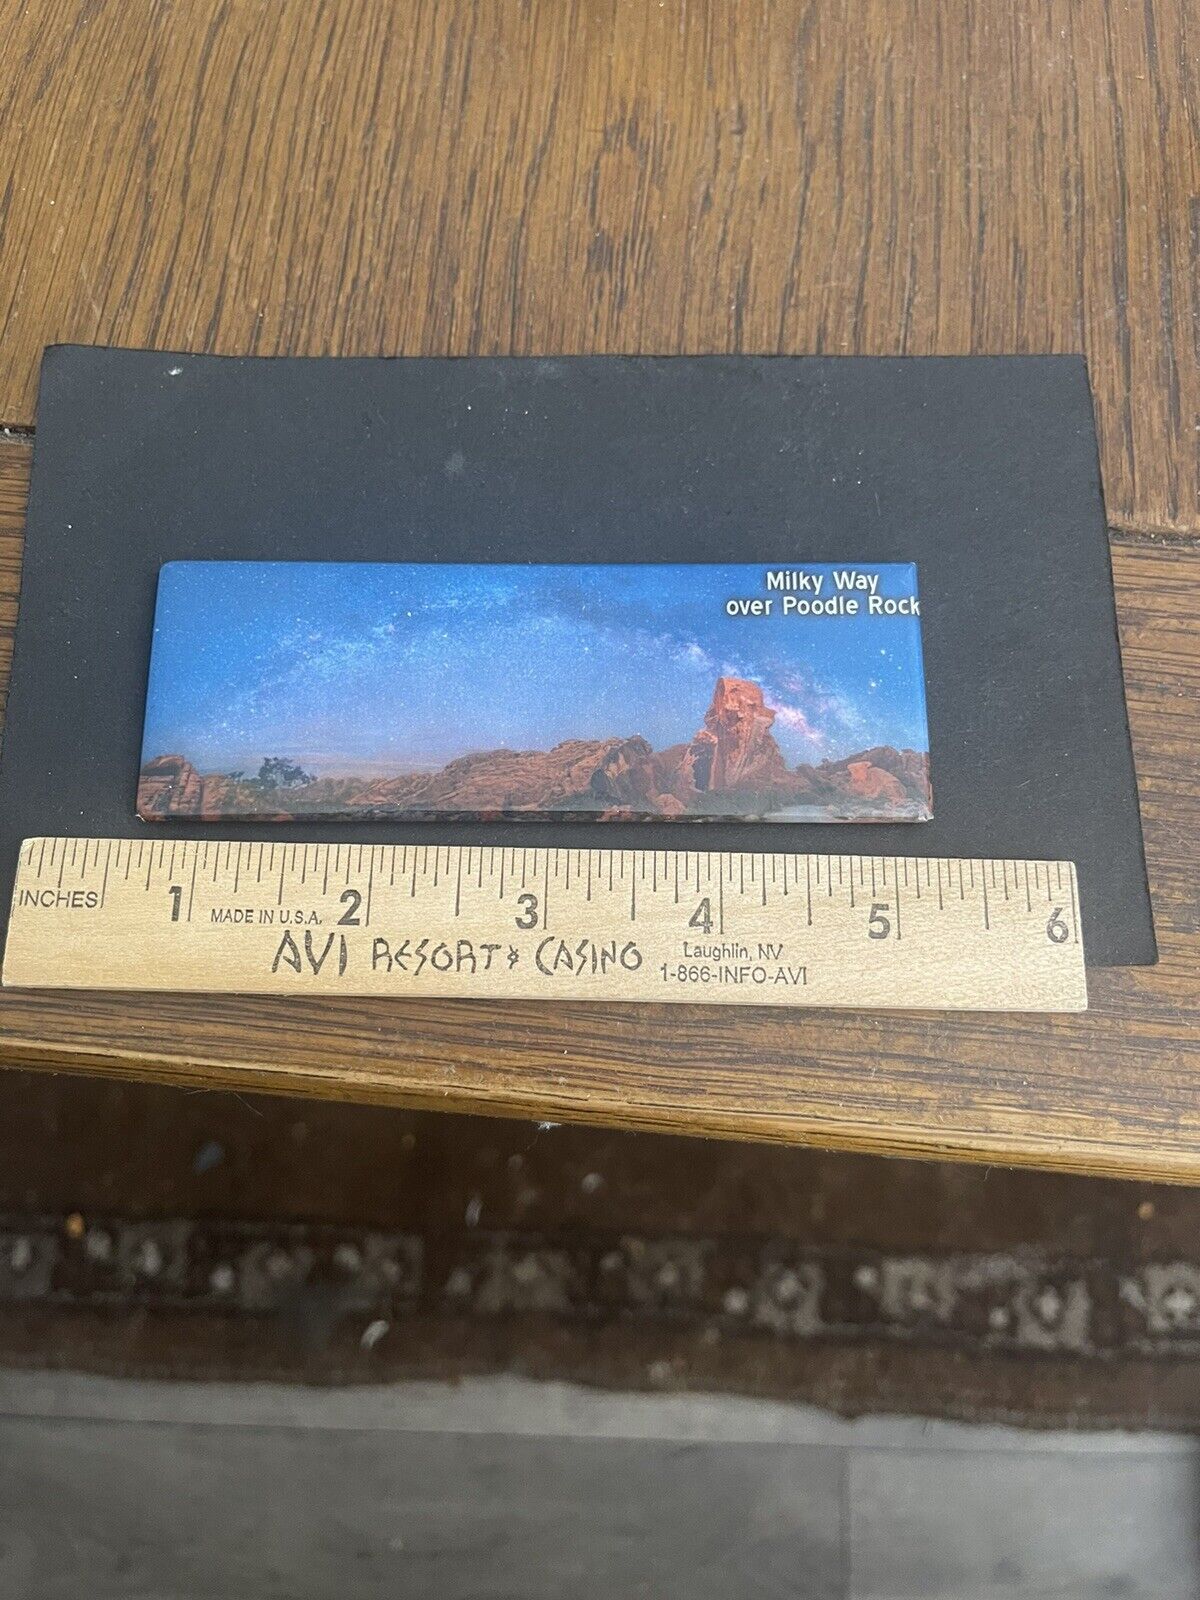 Milky Way Arch over Poodle Rock Refrigerator Magnet 4.75 X 1.75”